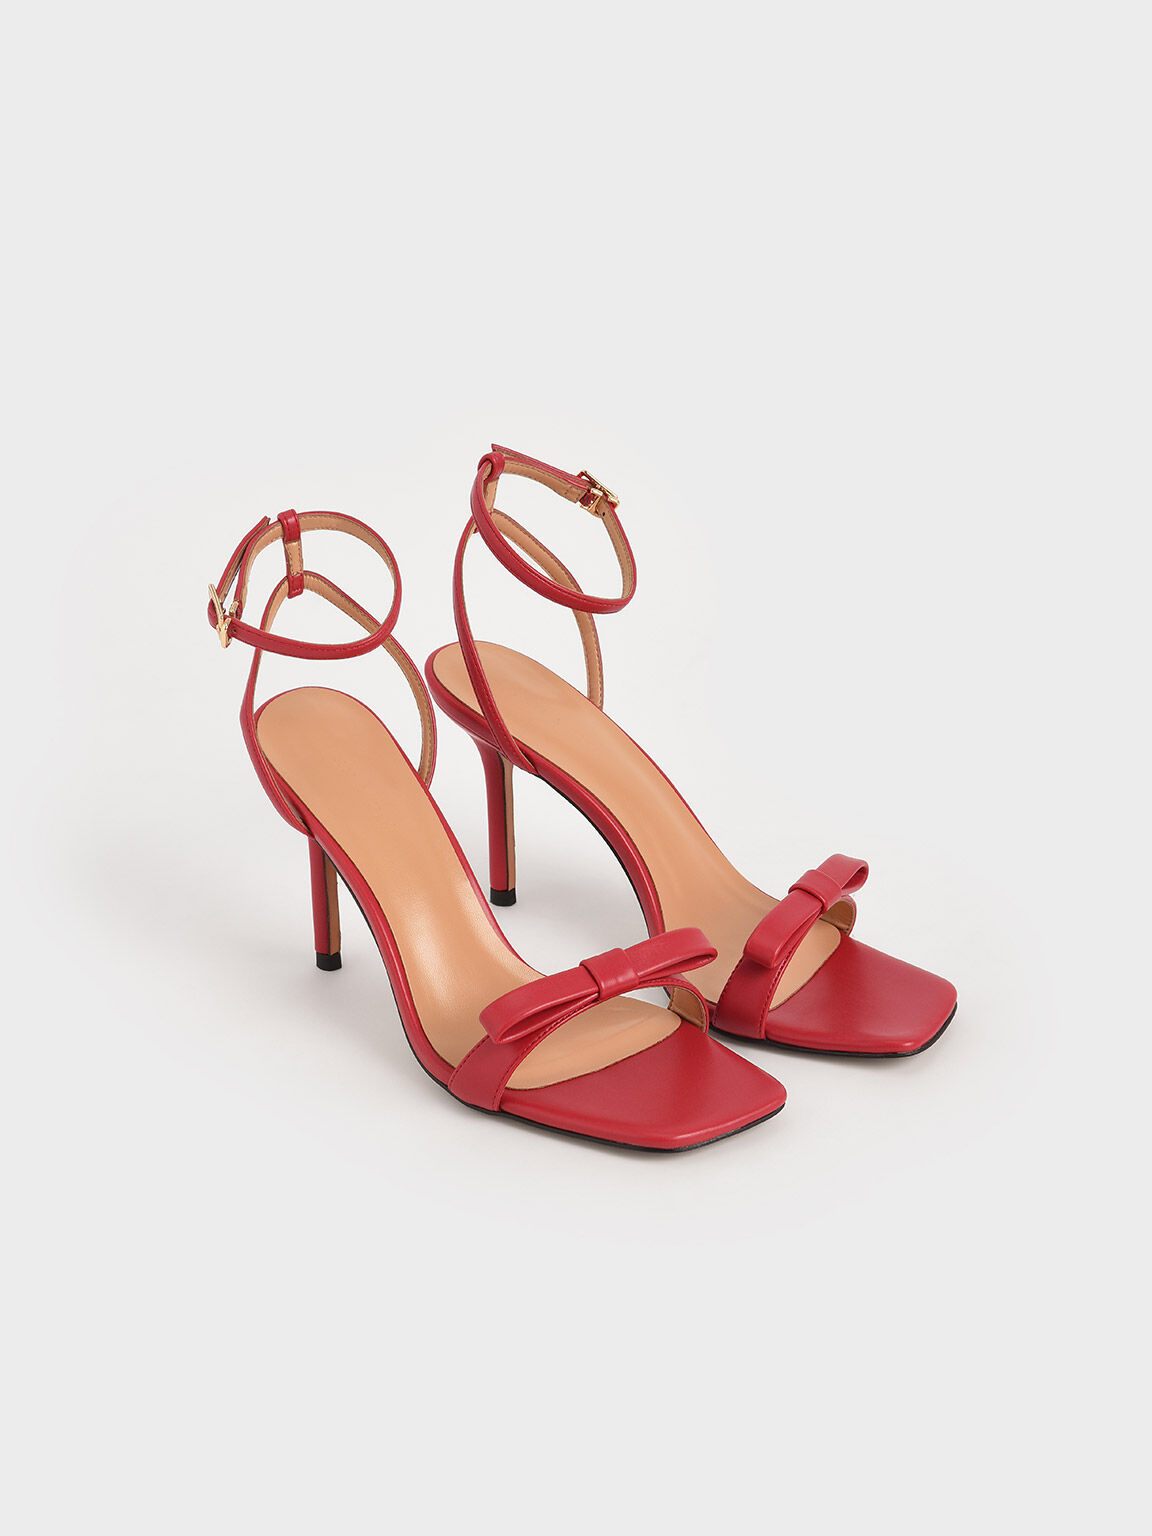 Bow Ankle Strap Sandals, Red, hi-res